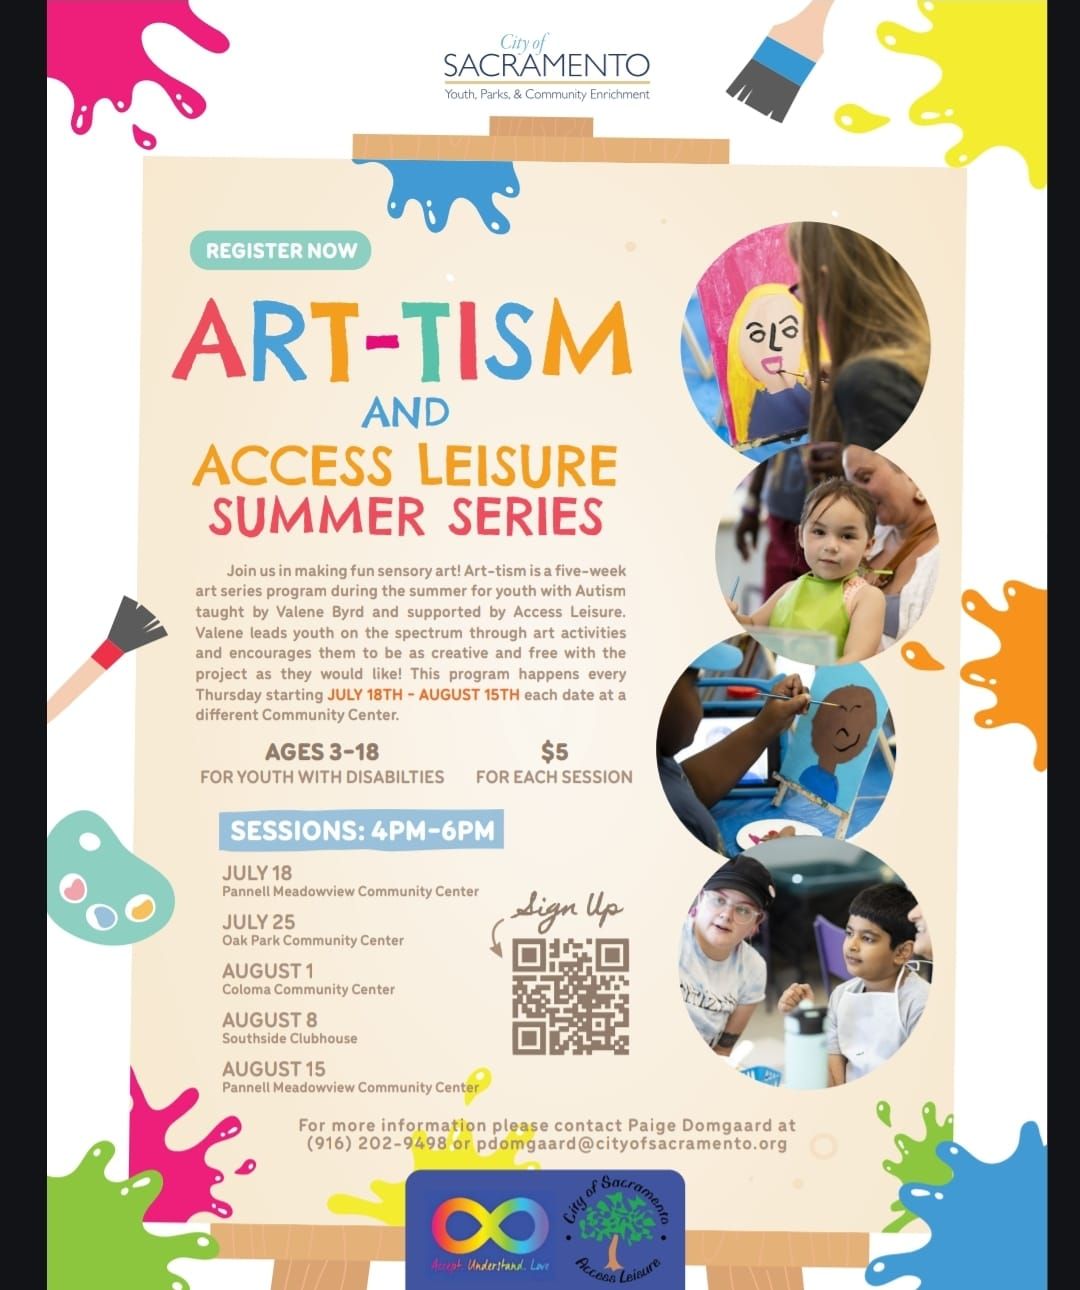 ART-TISM Summer Arts Series ( Every Thursday July 18th-August 15th, 4pm-6pm)